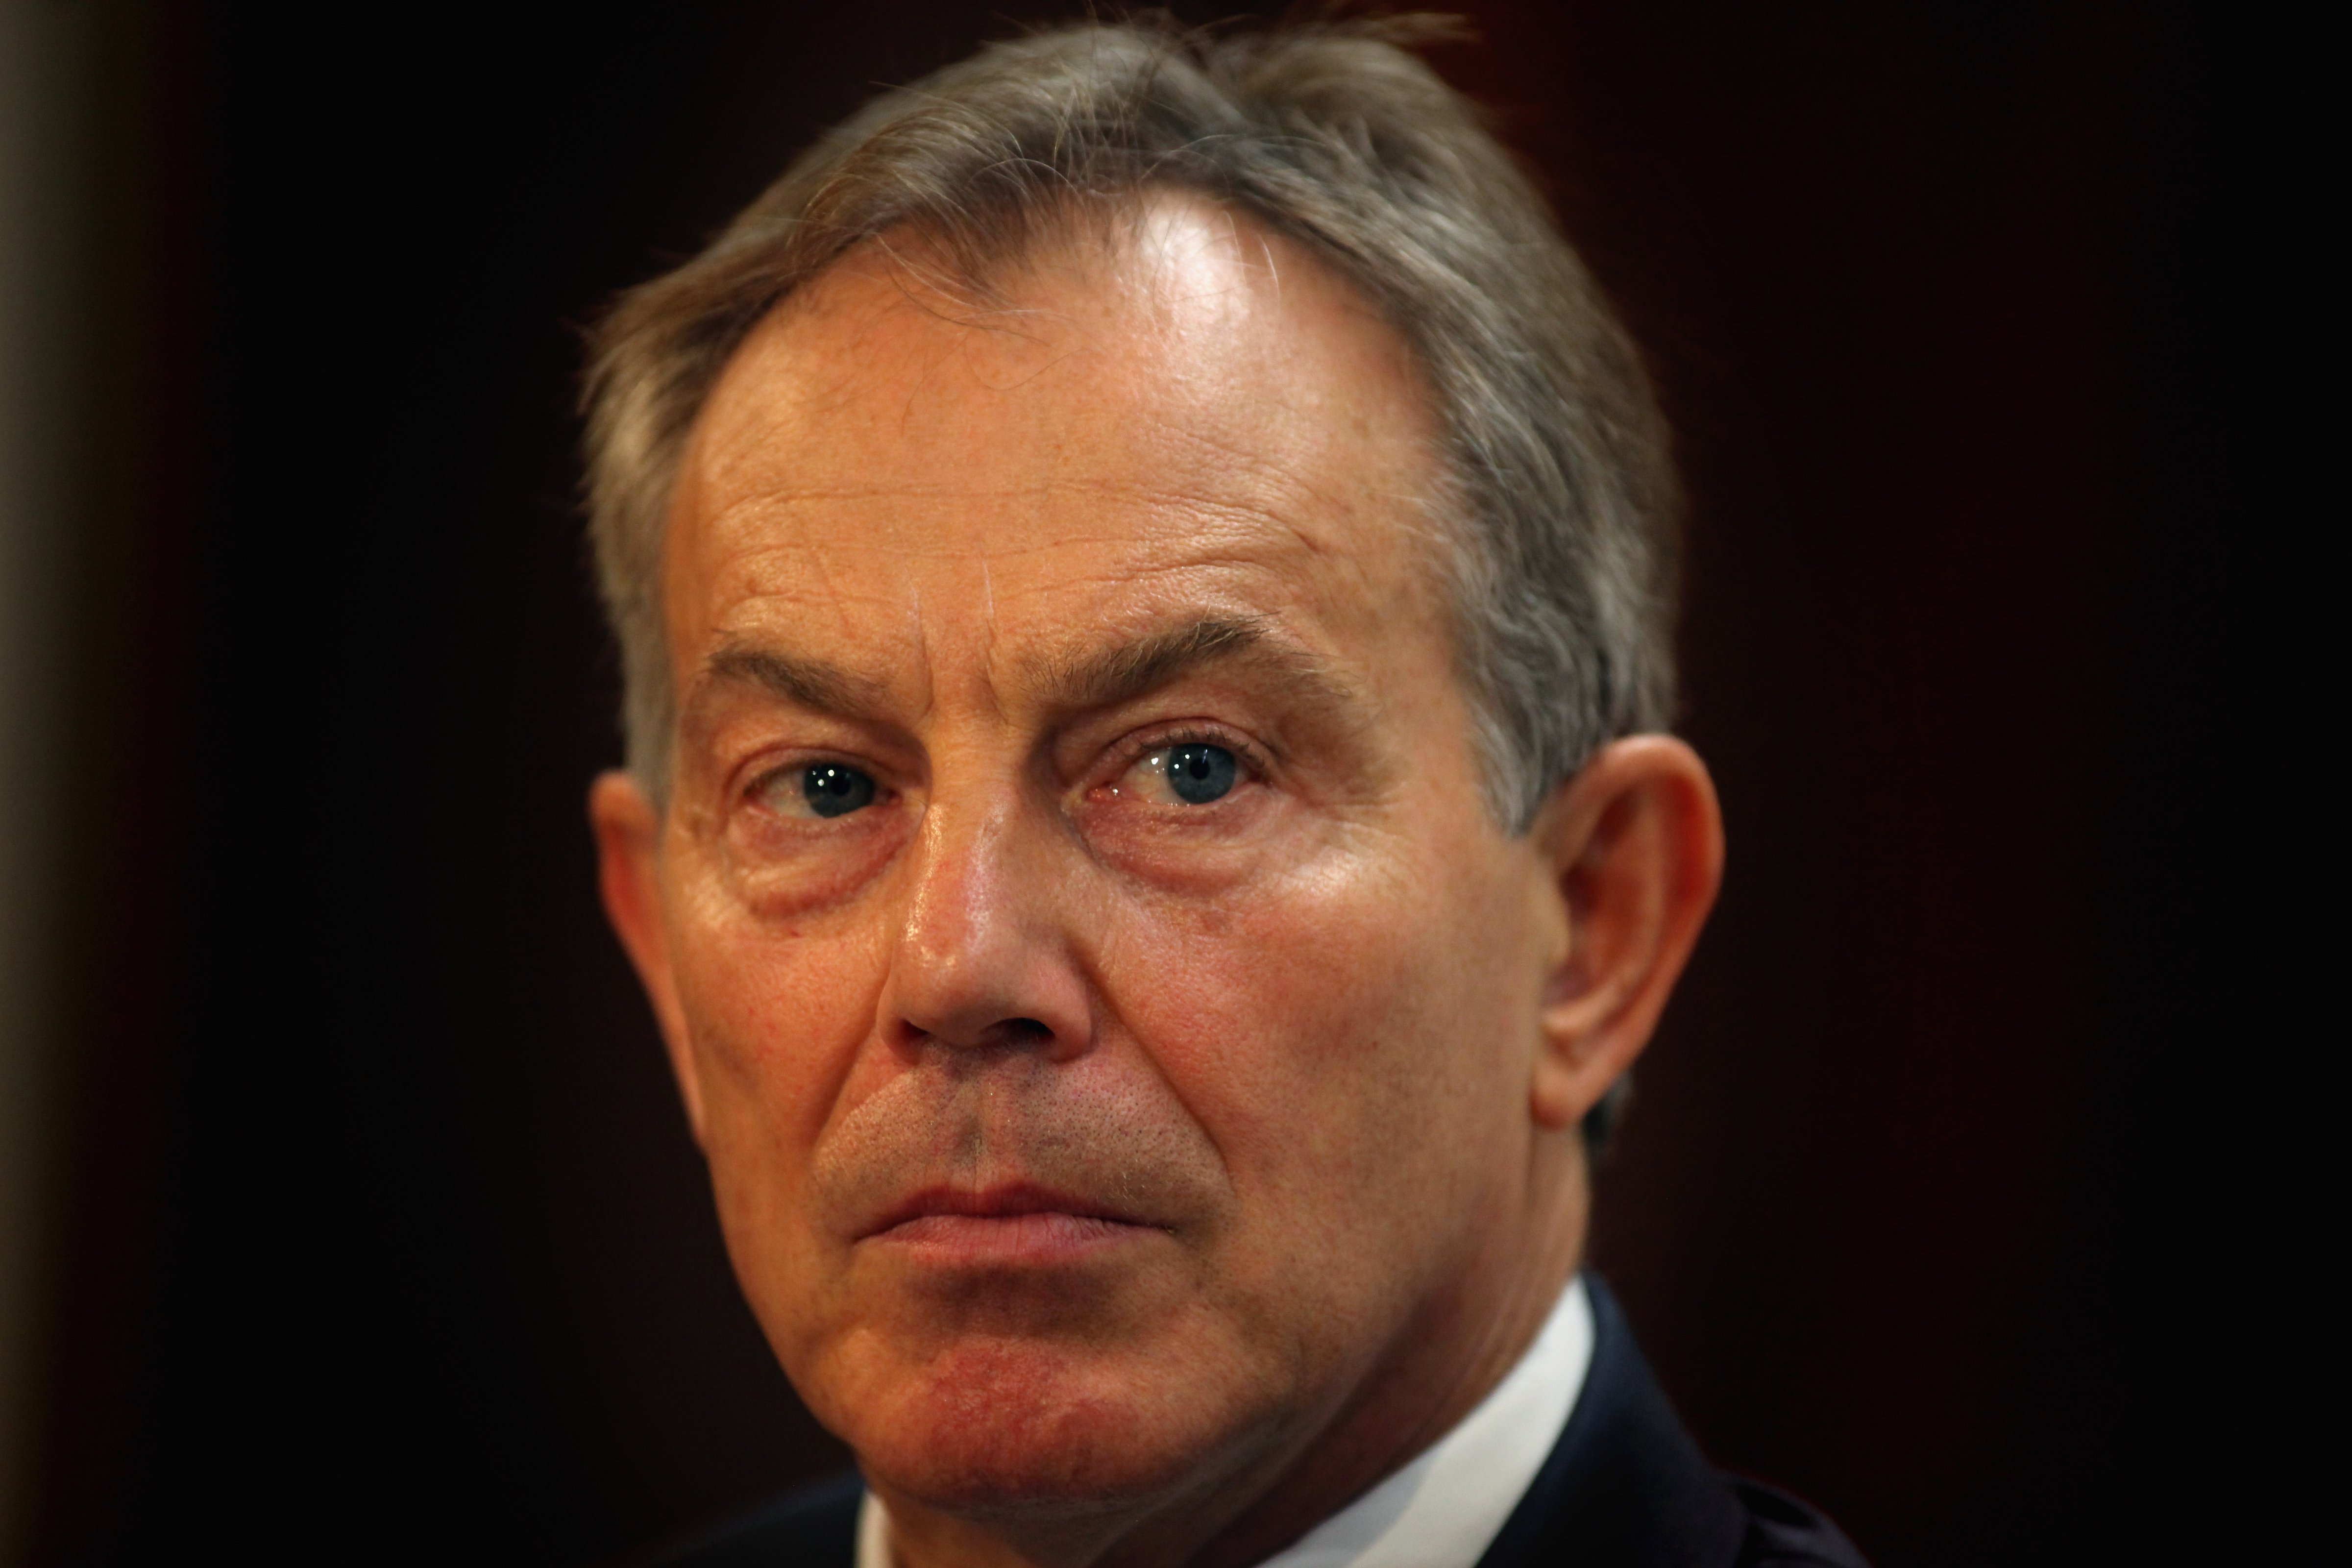 Former Prime Minister Tony Blair in 2011 (Matt Cardy—Getty Images)